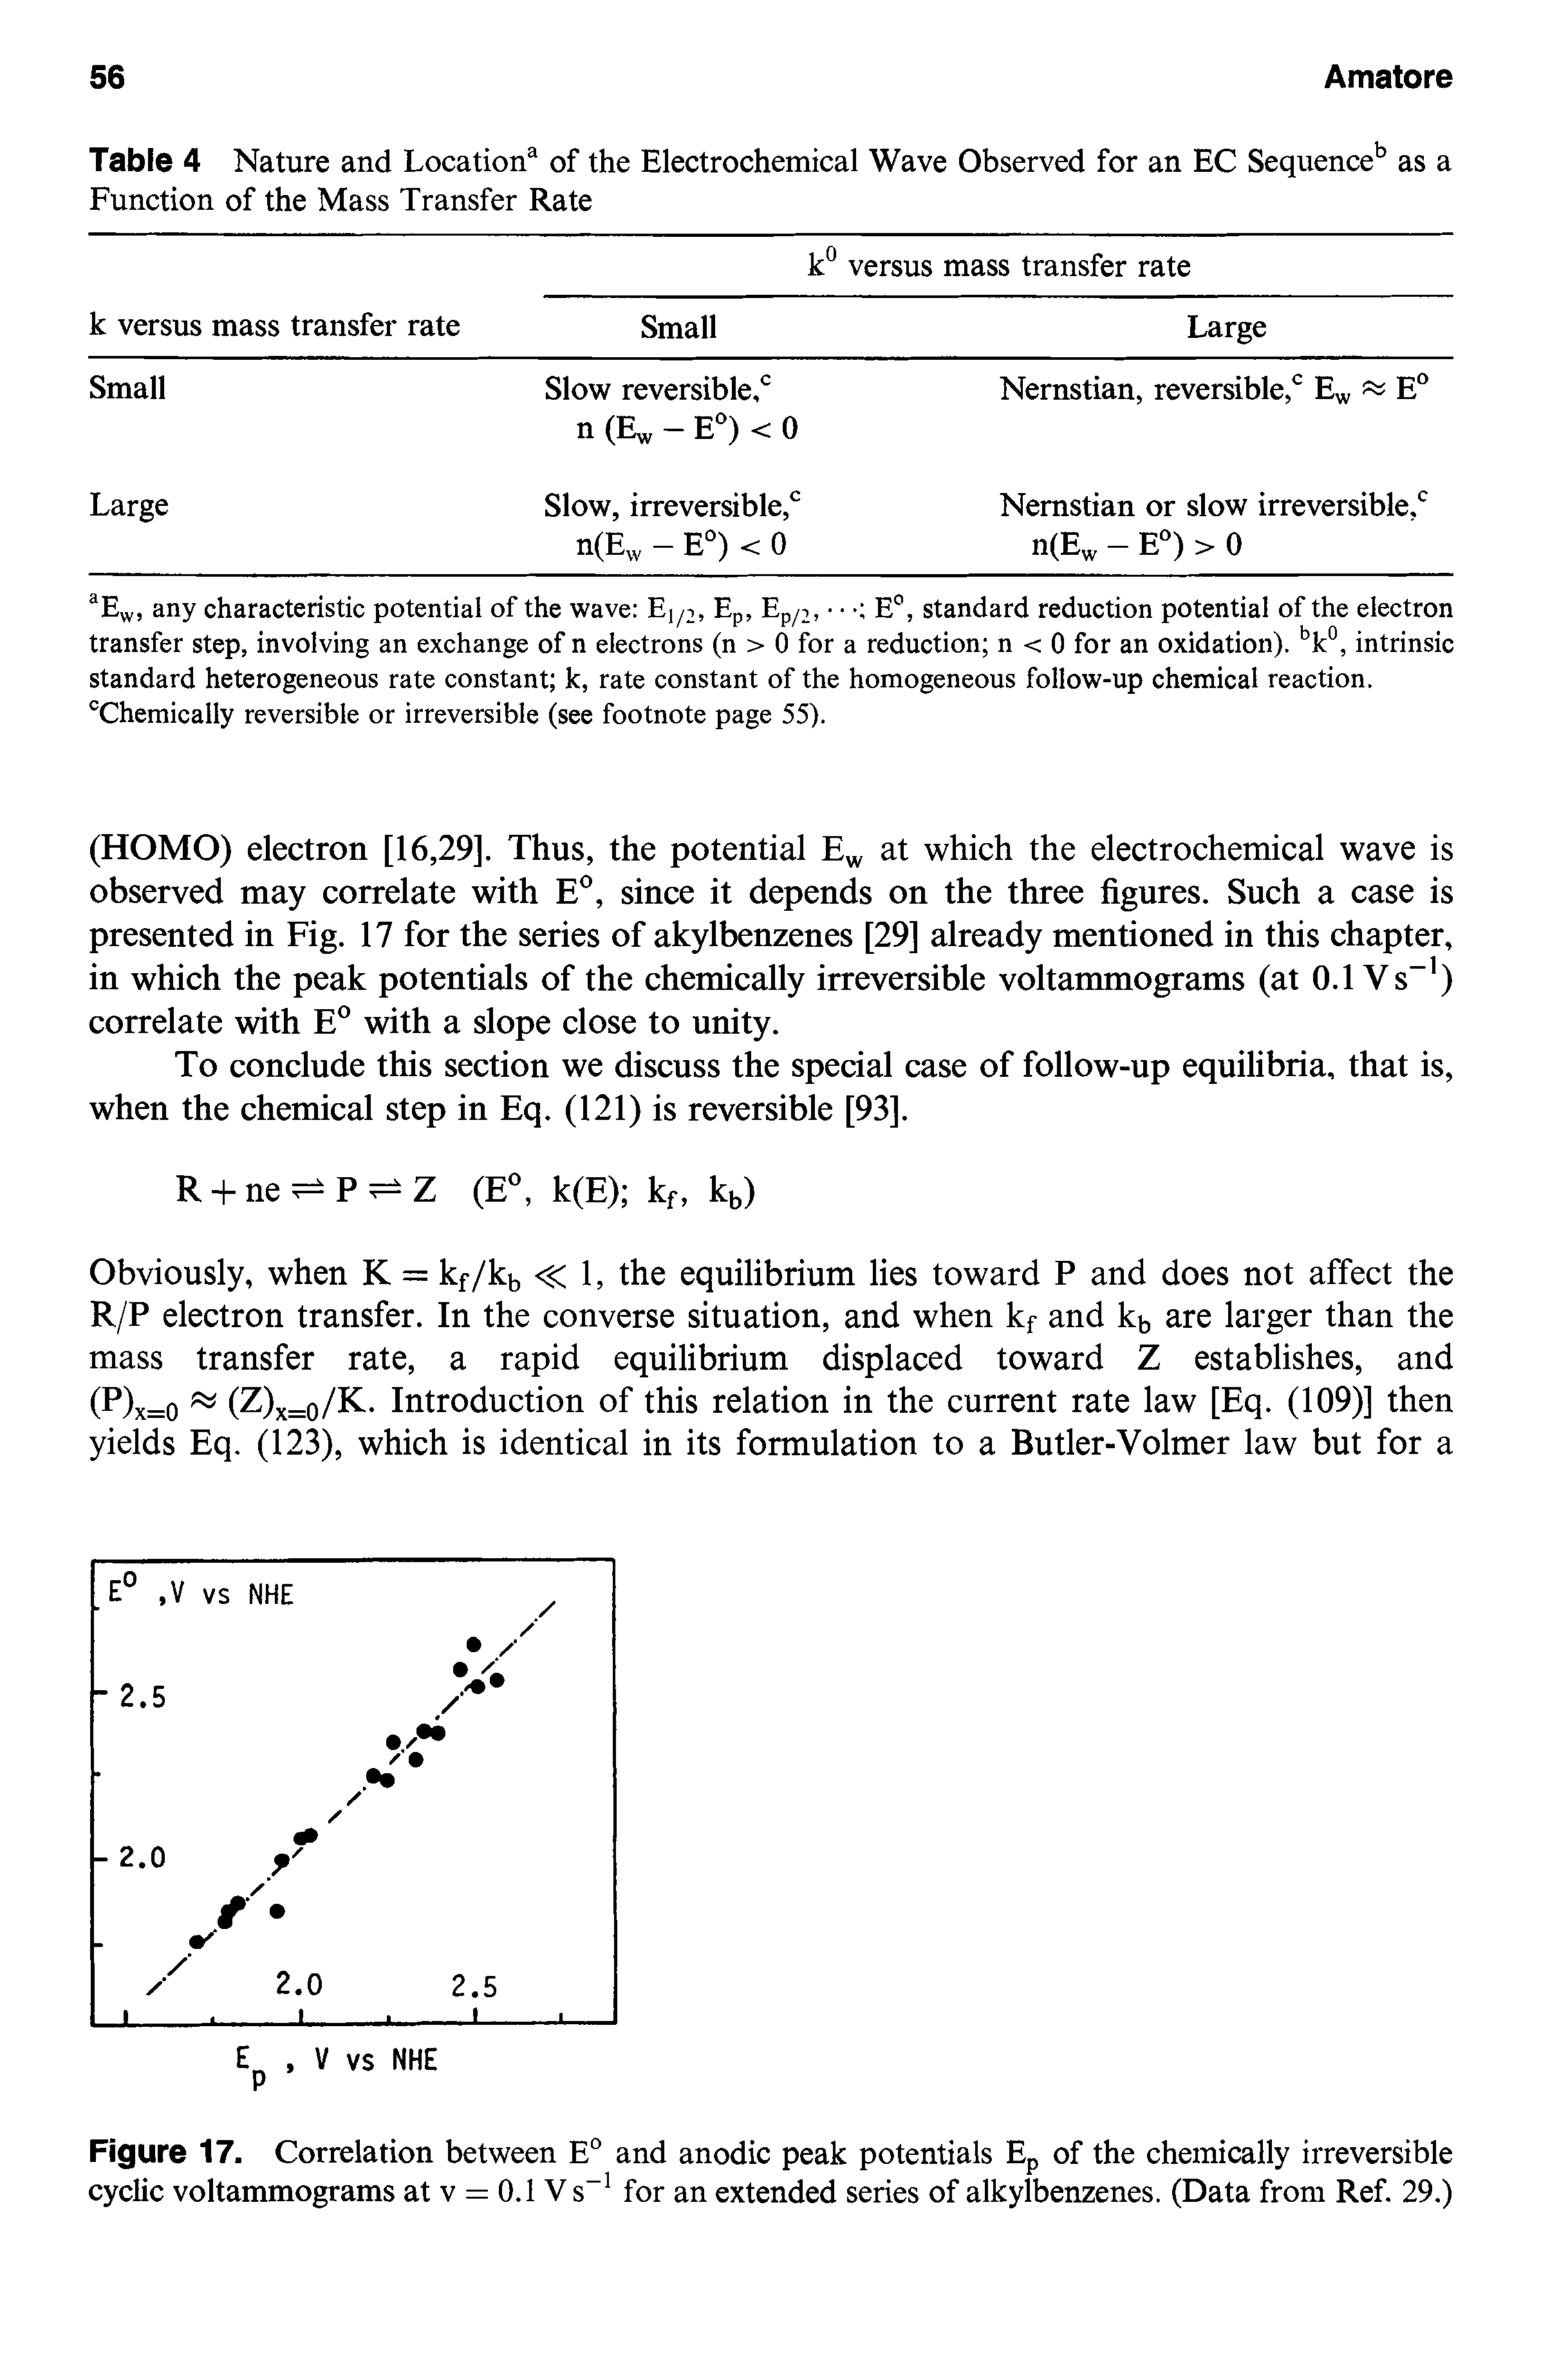 Table 4 Nature and Location of the Electrochemical Wave Observed for an EC Sequence as a Function of the Mass Transfer Rate...